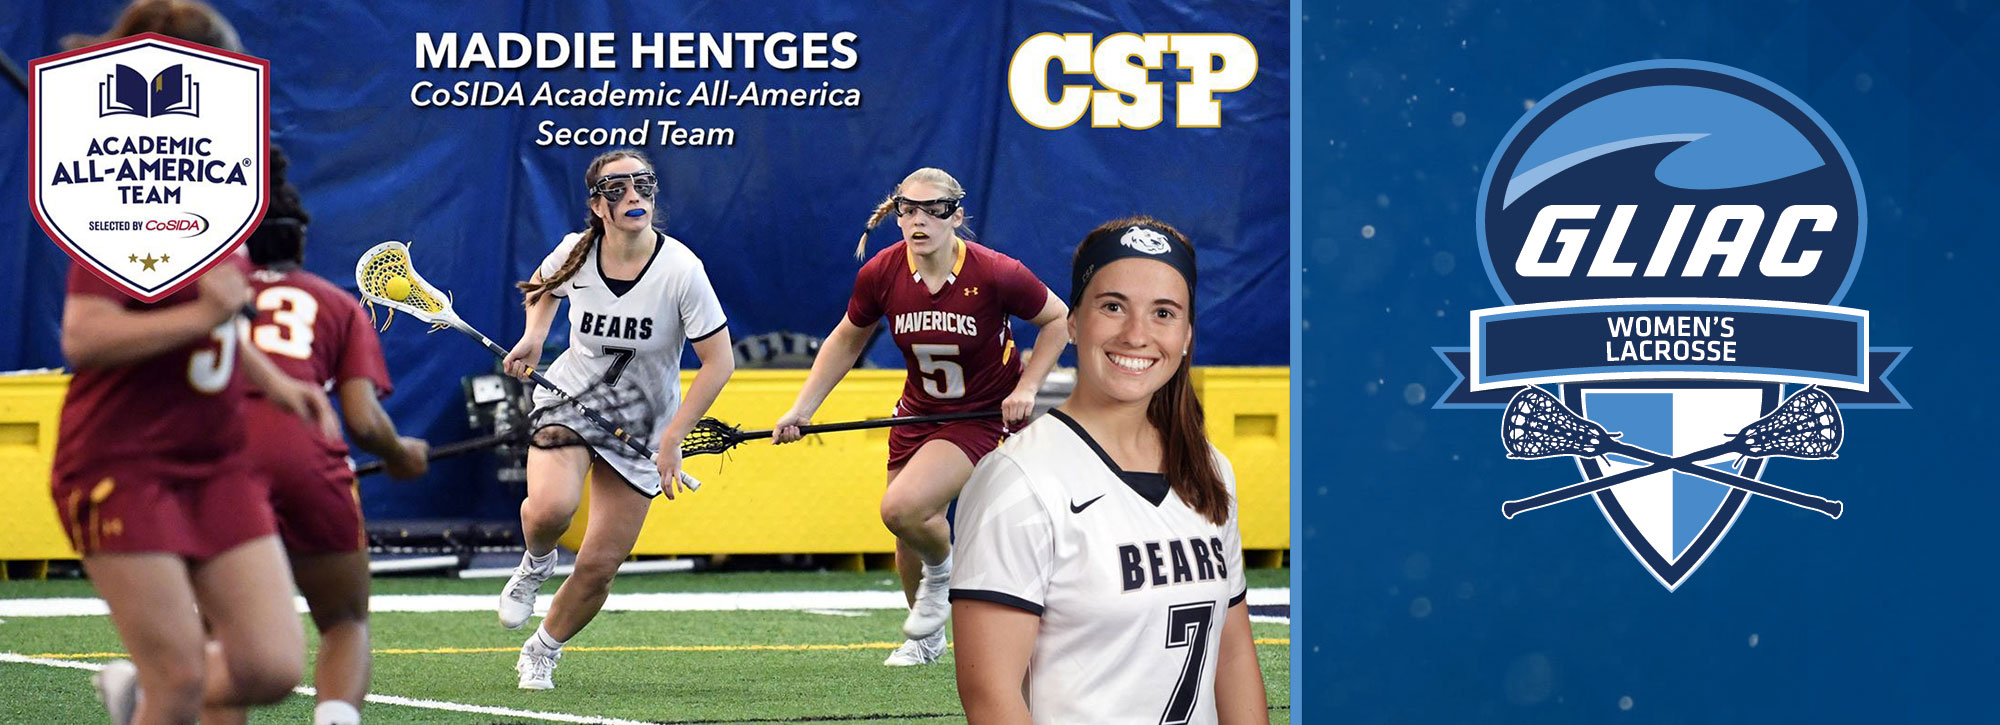 CSP's Maddie Hentges named CoSIDA Academic All-America Second Team